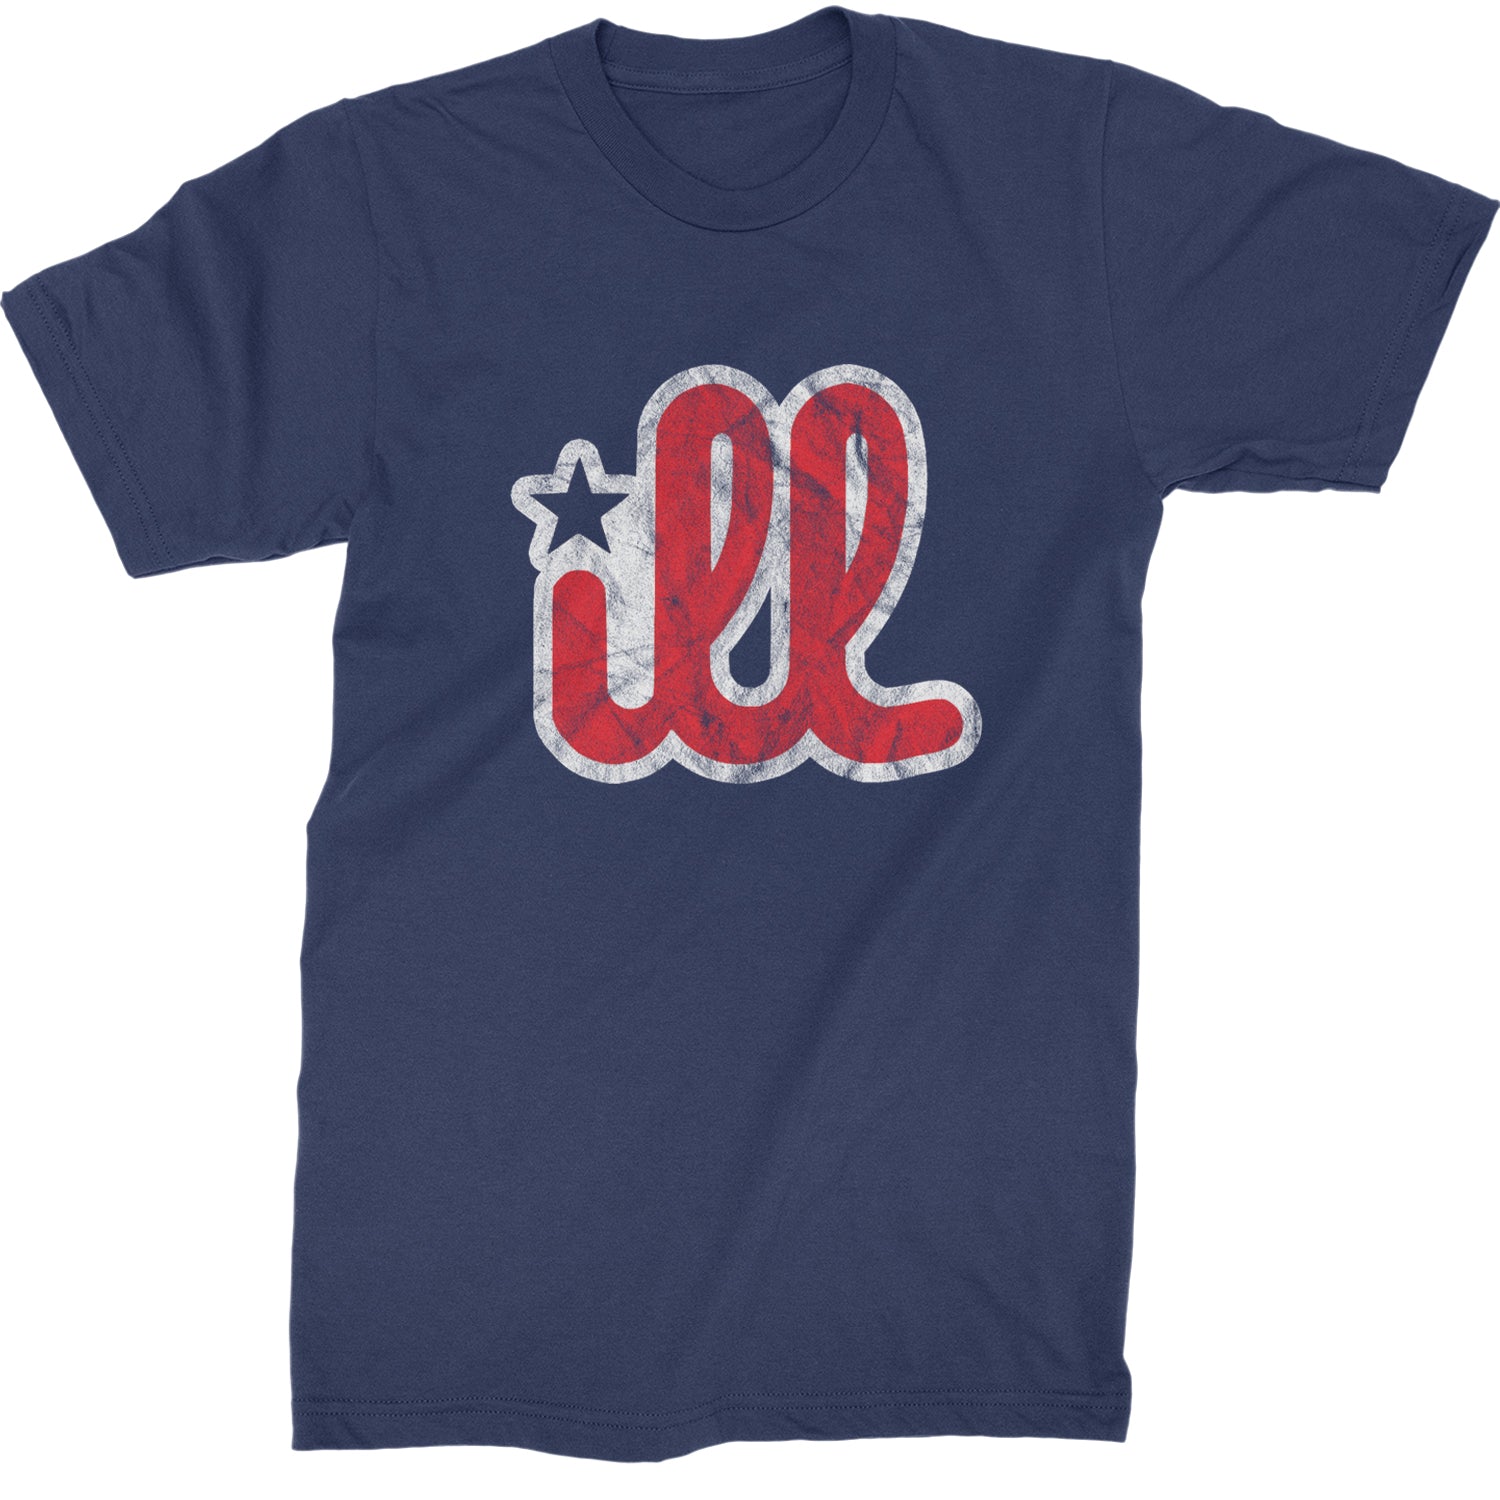 ILL Vintage It's A Philadelphia Philly Thing Mens T-shirt Navy Blue